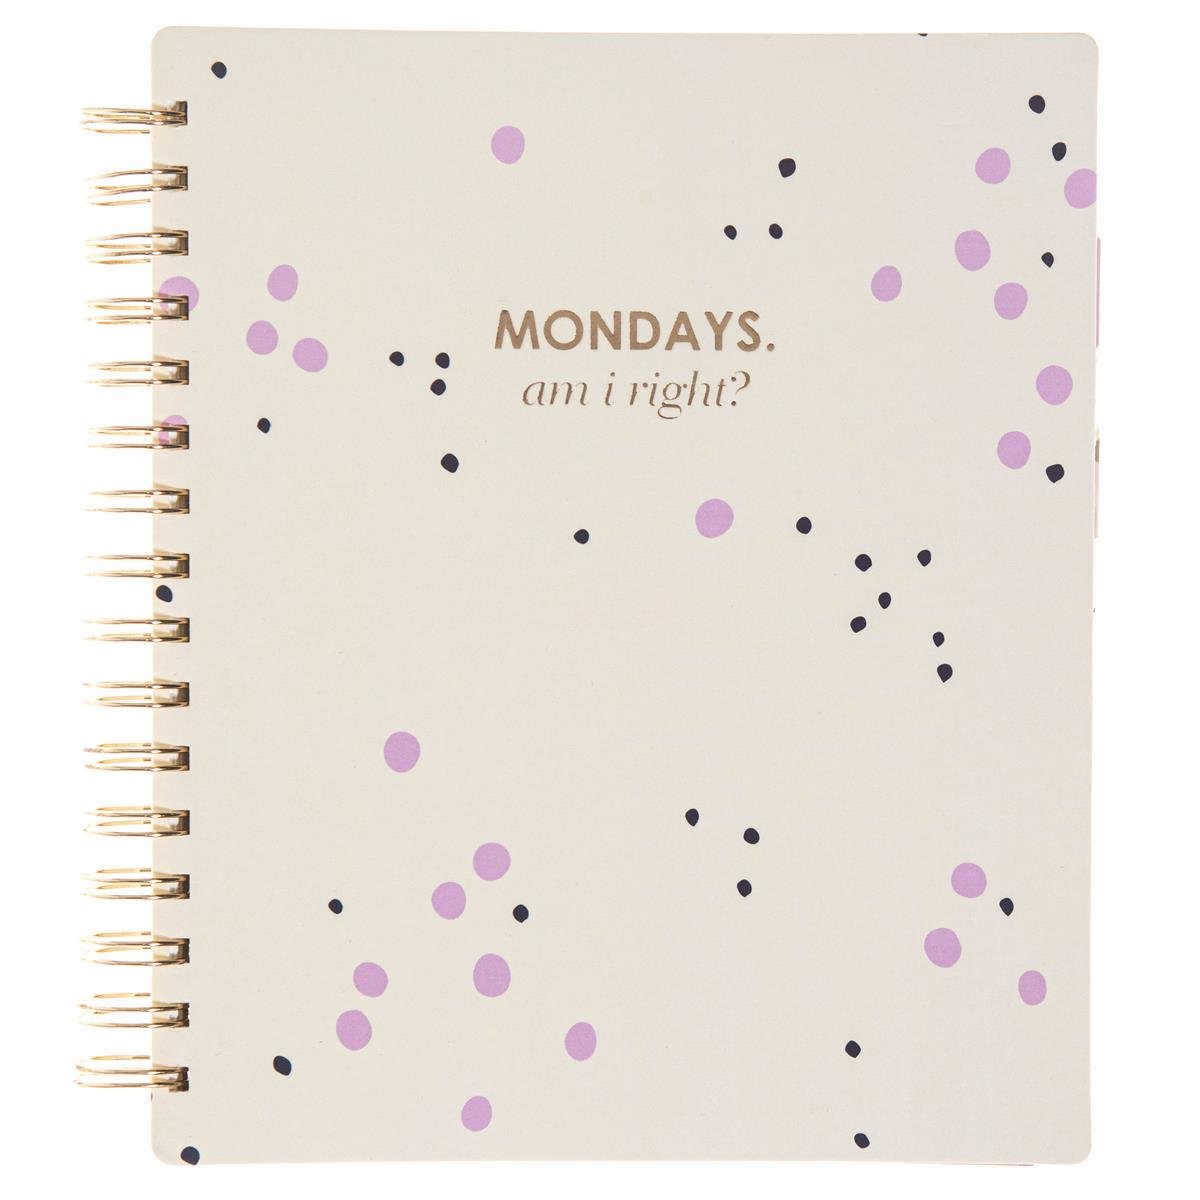 Last Call! Mondays, Am I Right? Spiral Undated Planner With Shiny Gold Wiro